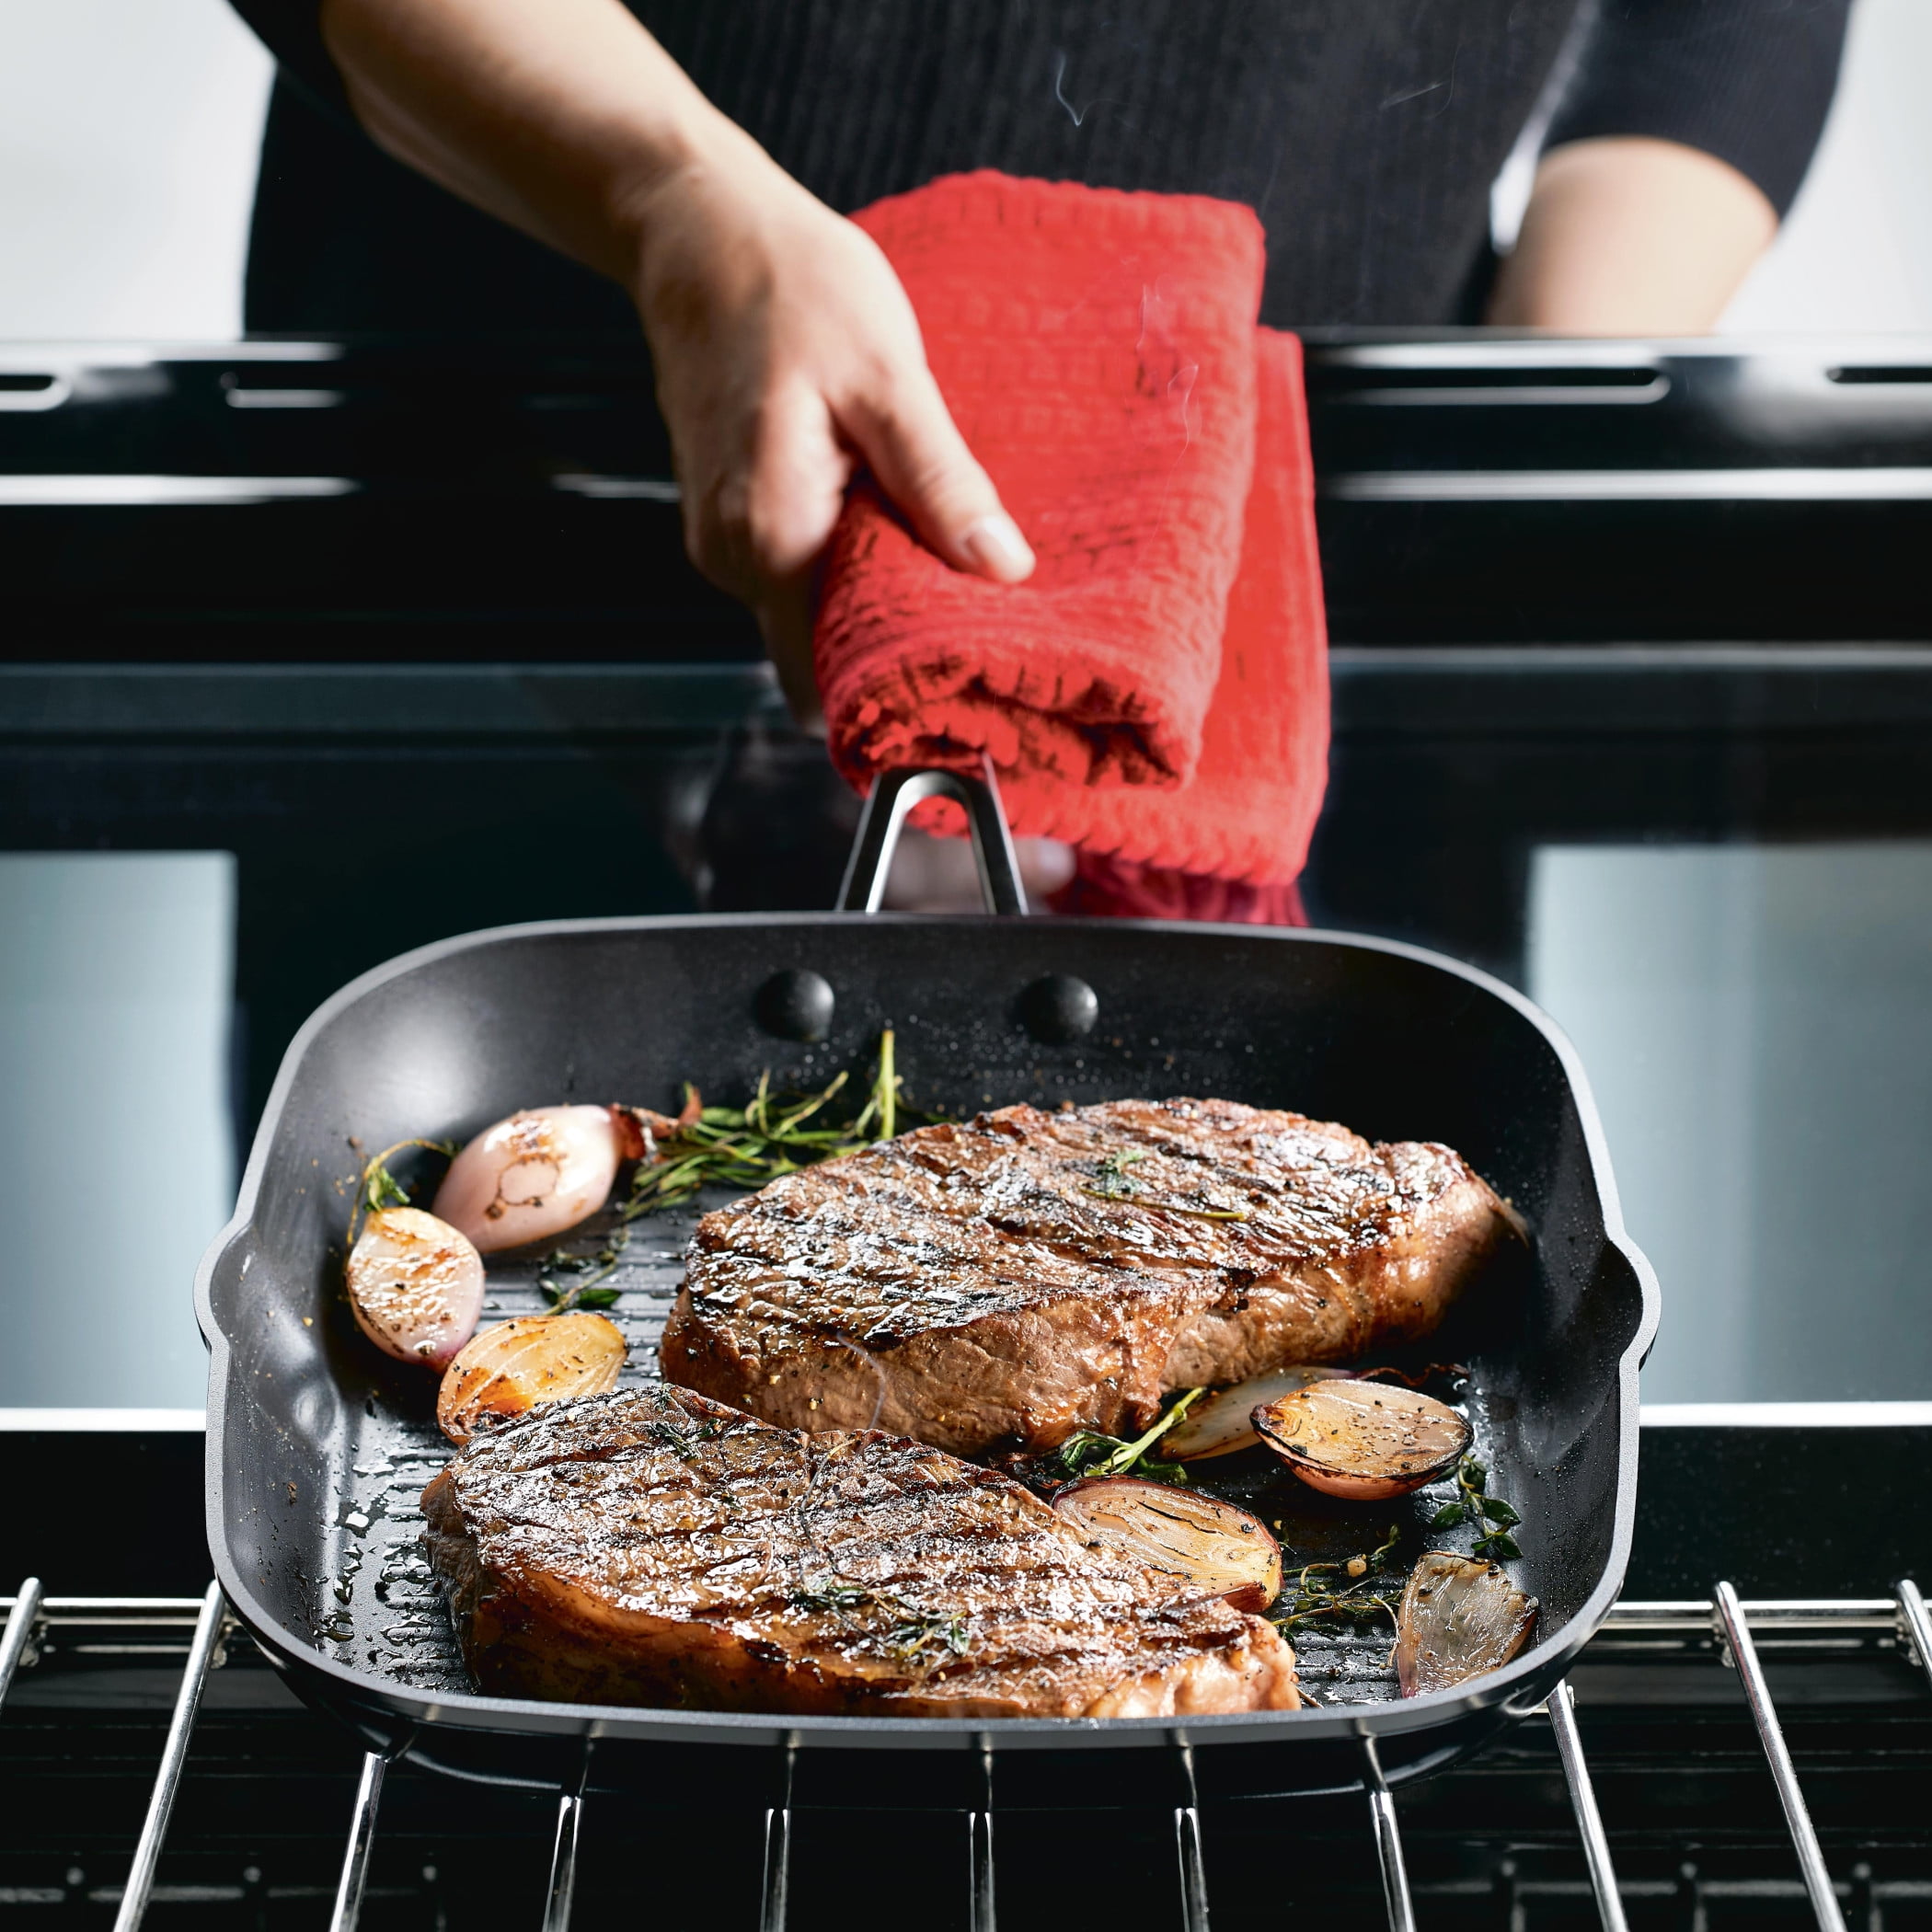 KitchenAid Hard Anodized Nonstick Square Grill Pan/Griddle with Pour  Spouts, 11.25 Inch, Onyx Black